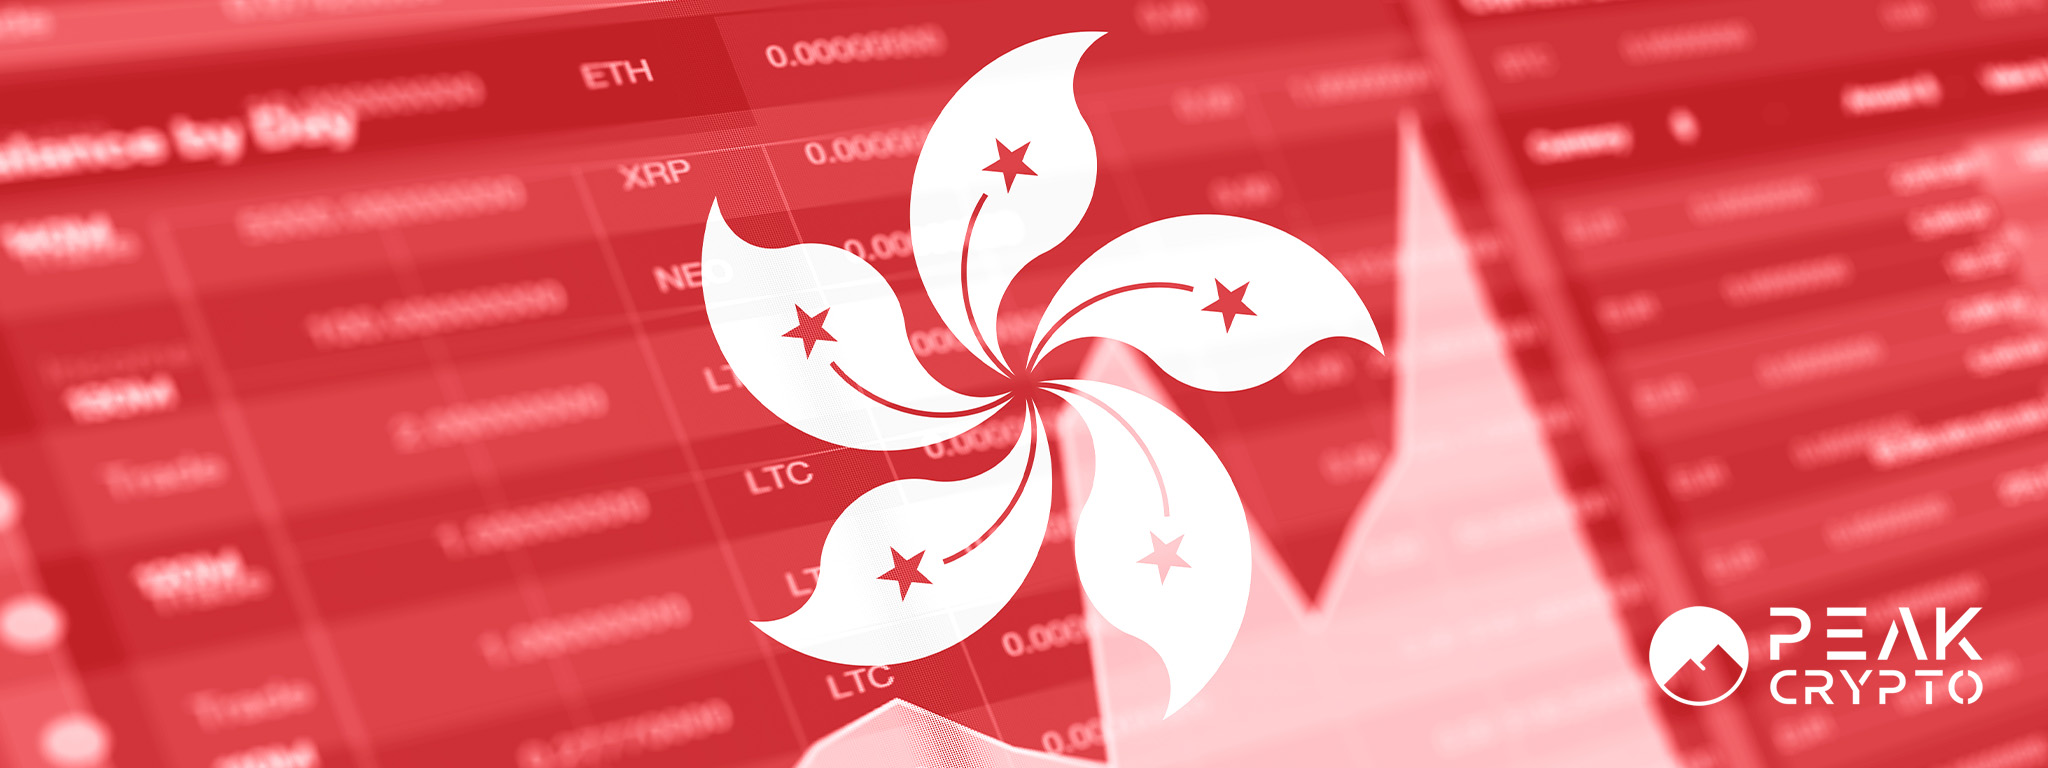 Cryptocurrency Companies Gear Up for Licensing in Hong Kong Prior to Retail Launch